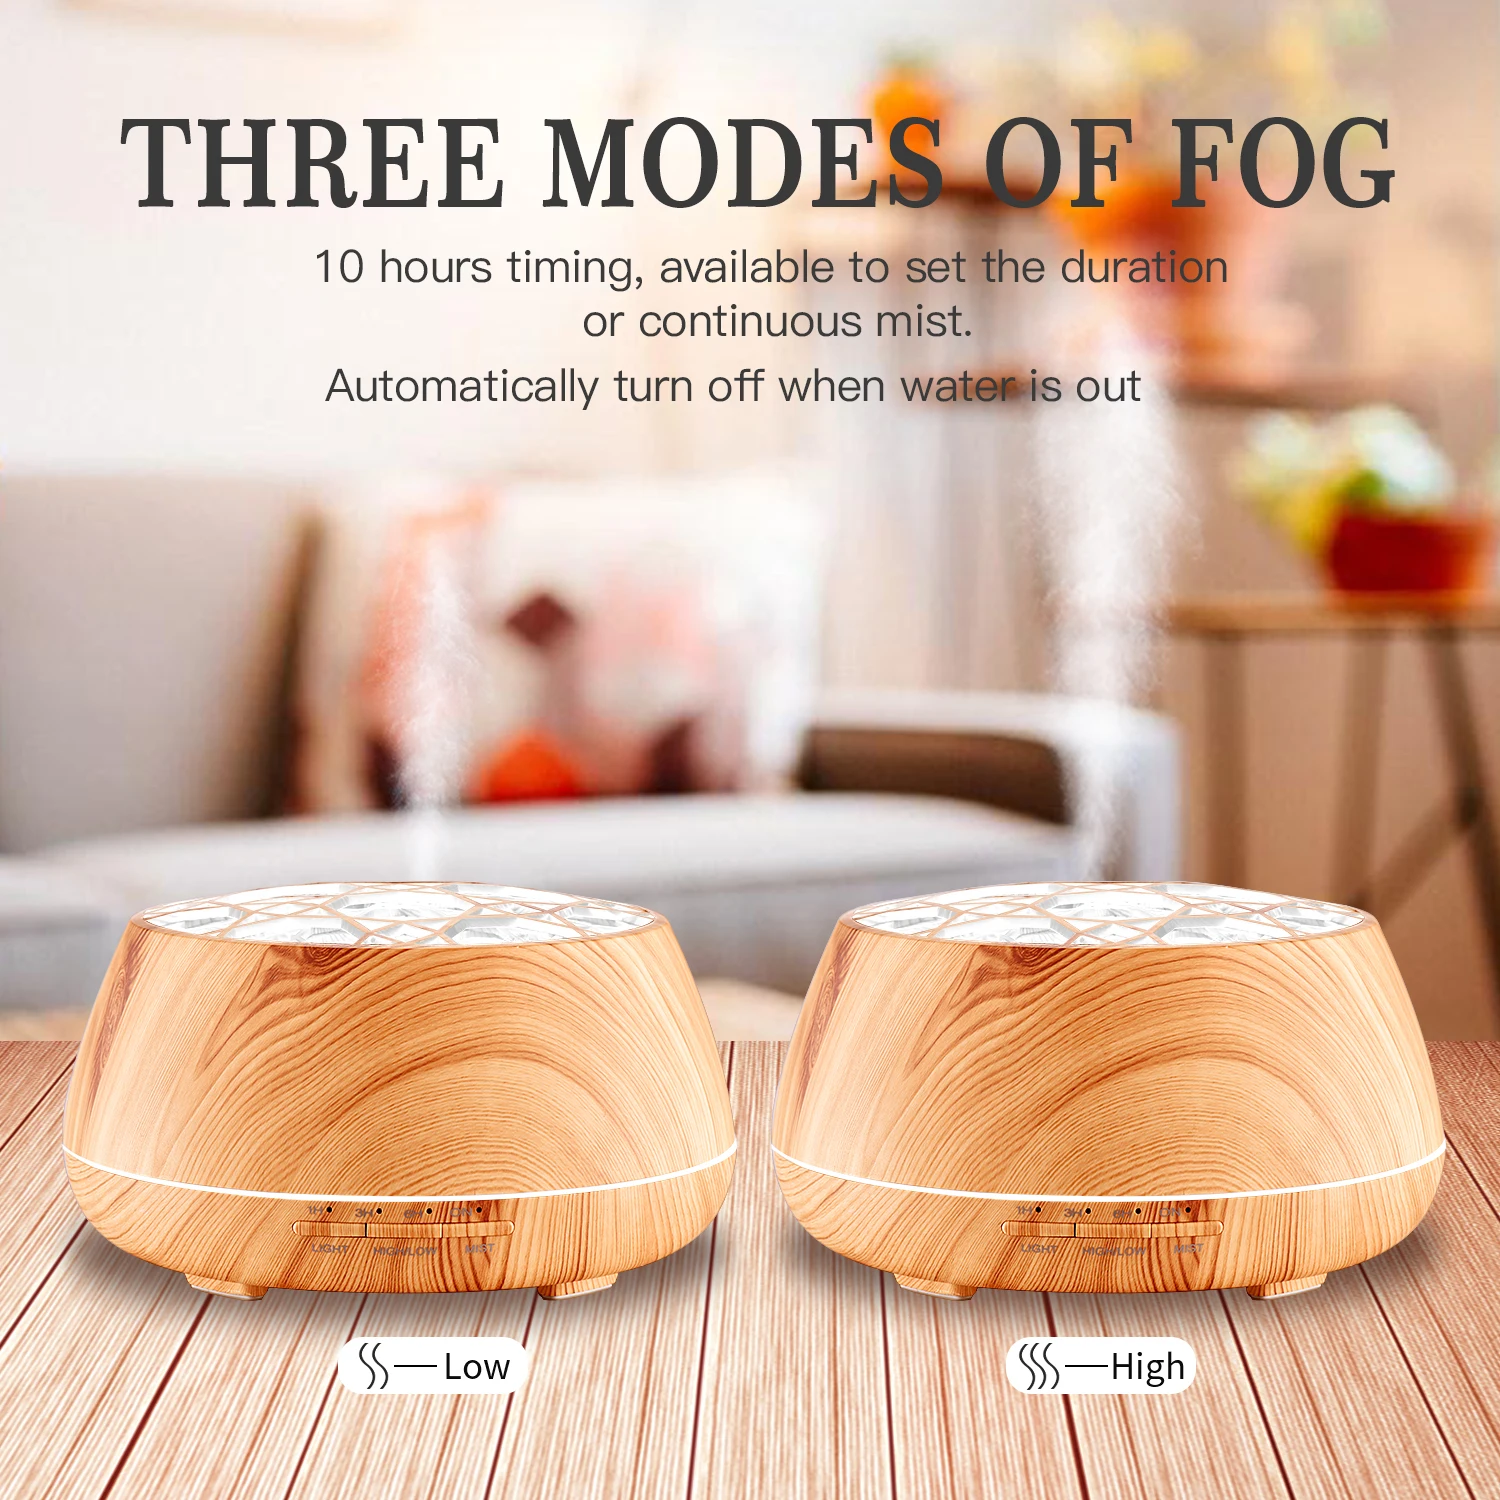 LAOPAO Led 7 Color Bluetooth Play Music Air Humidifier Aroma Lamp Aromatherma Diffuser Mist Maker APP Control Night light